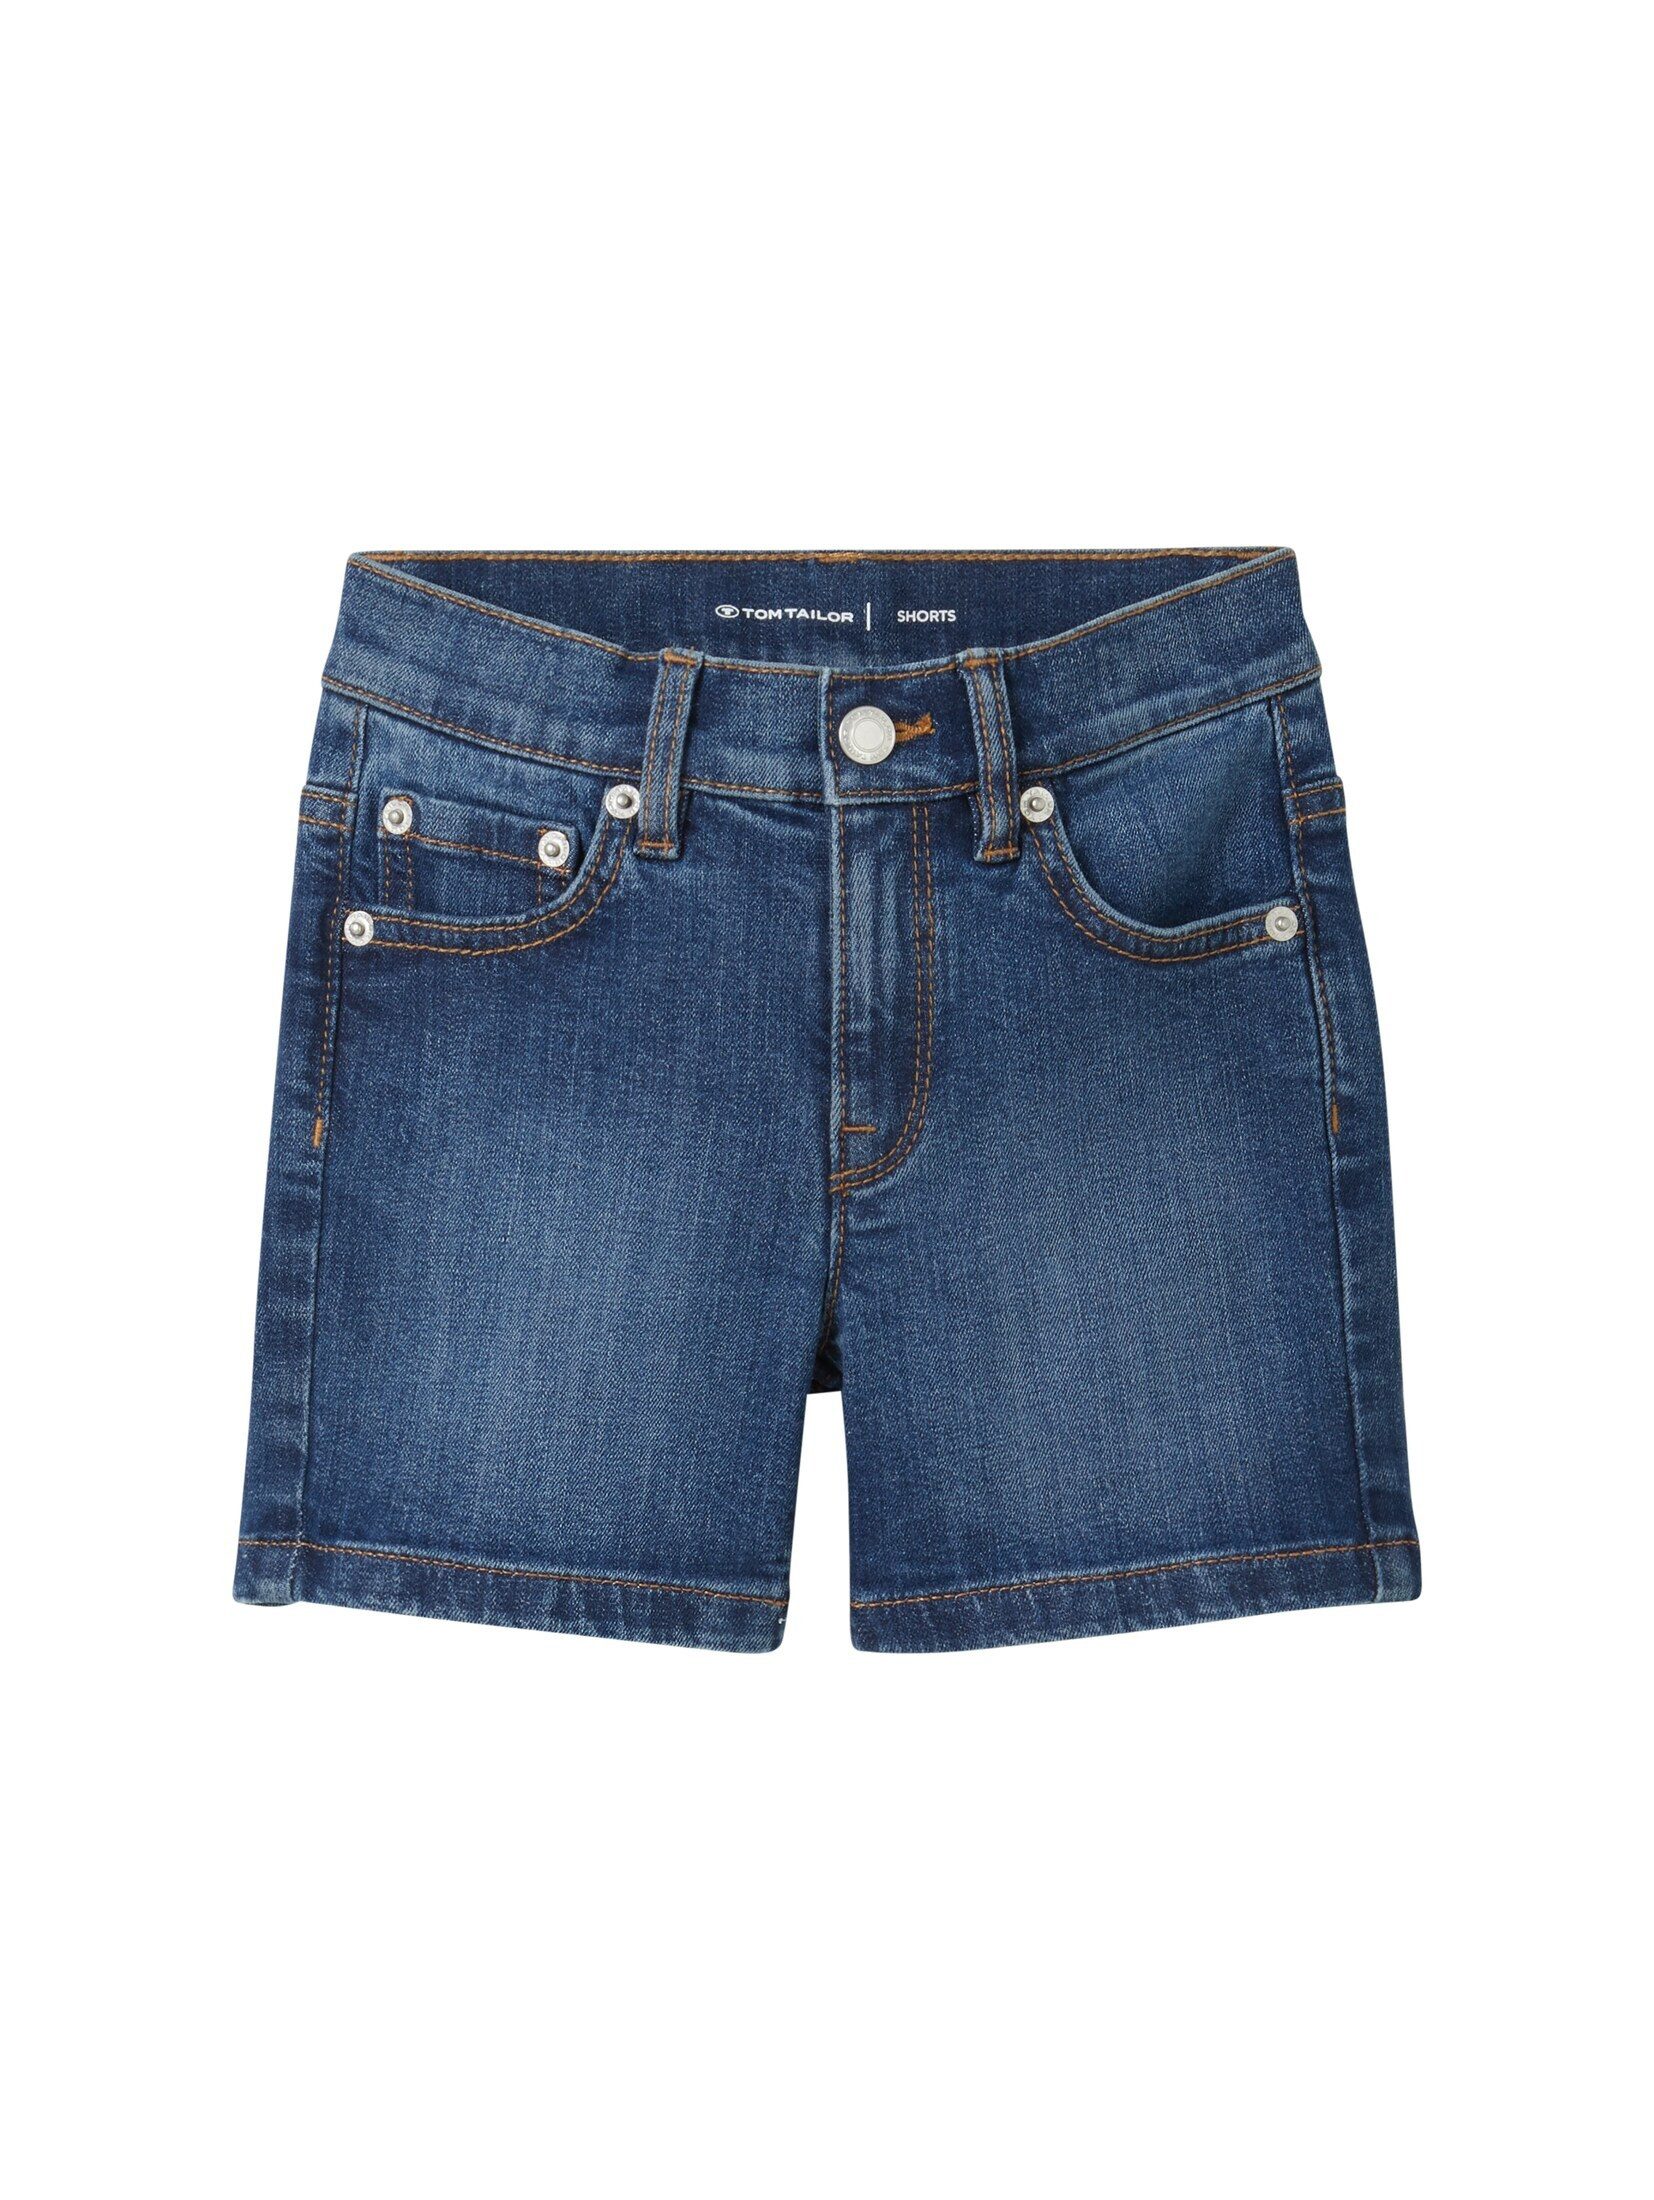 TOM TAILOR Jeansshorts Jeansshorts